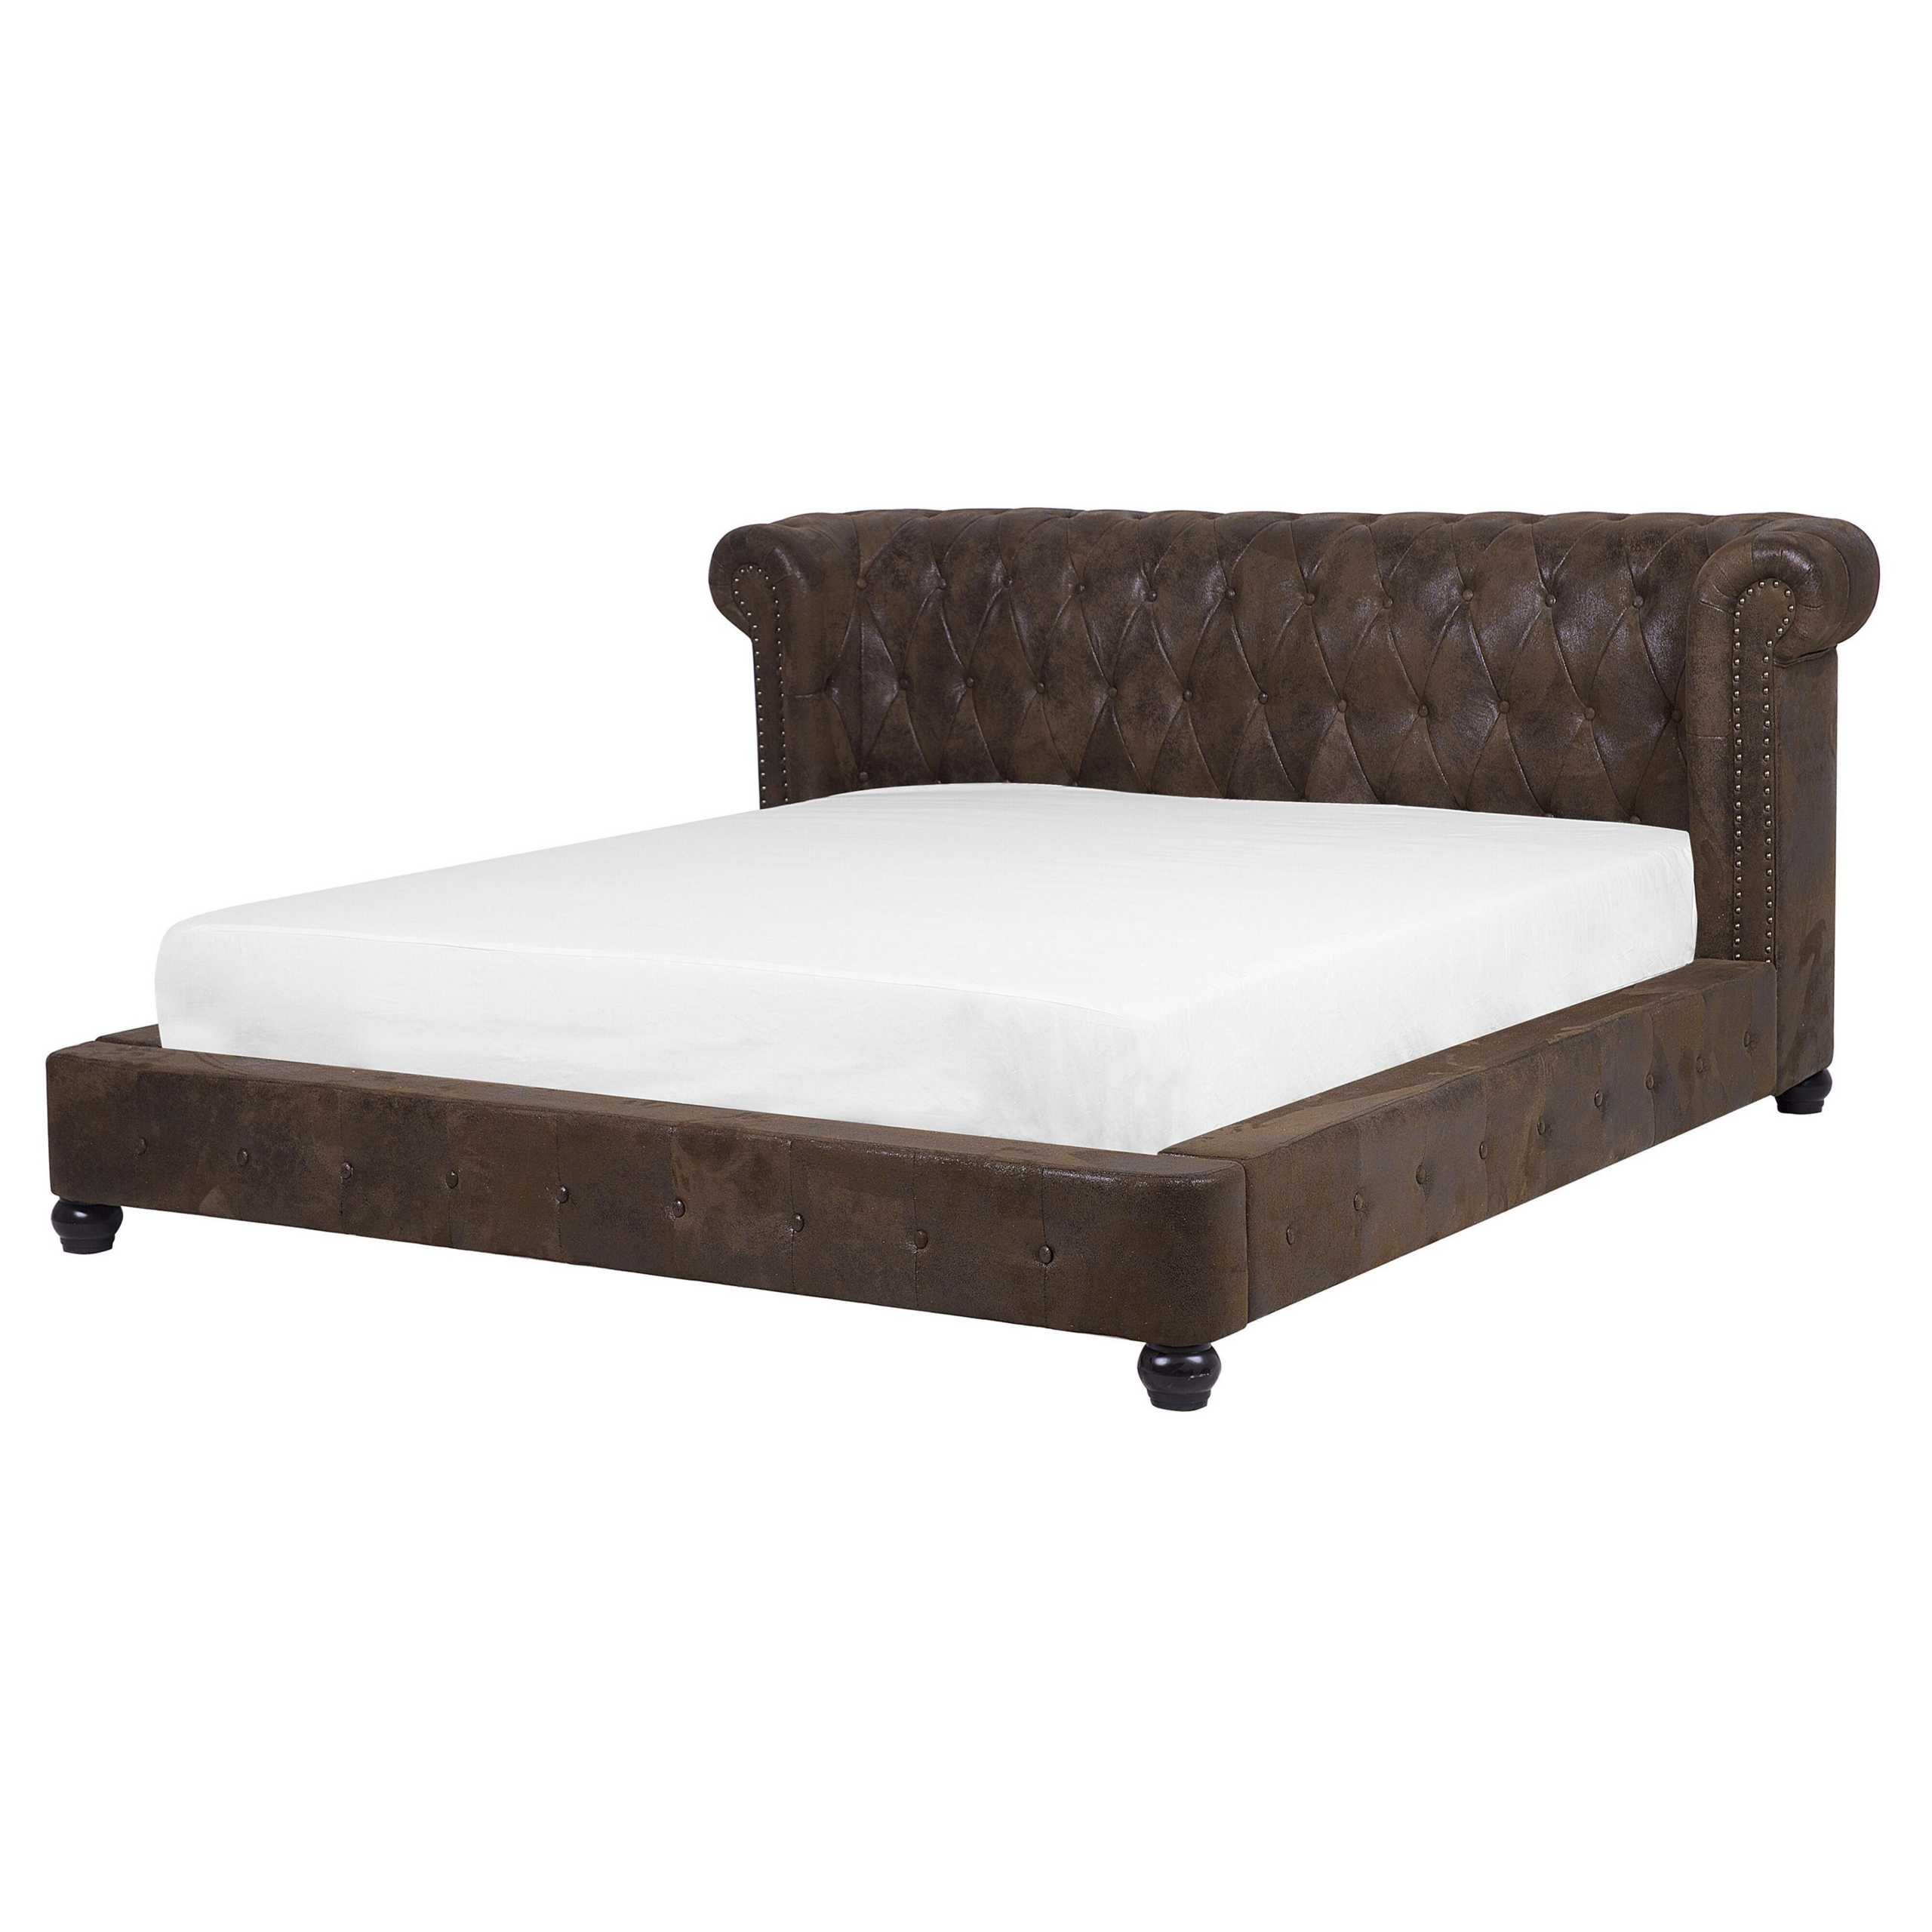 Beliani EU King Size Panel Bed 5ft3 Brown Faux Suede Slatted Frame Chesterfield Headboard Classic